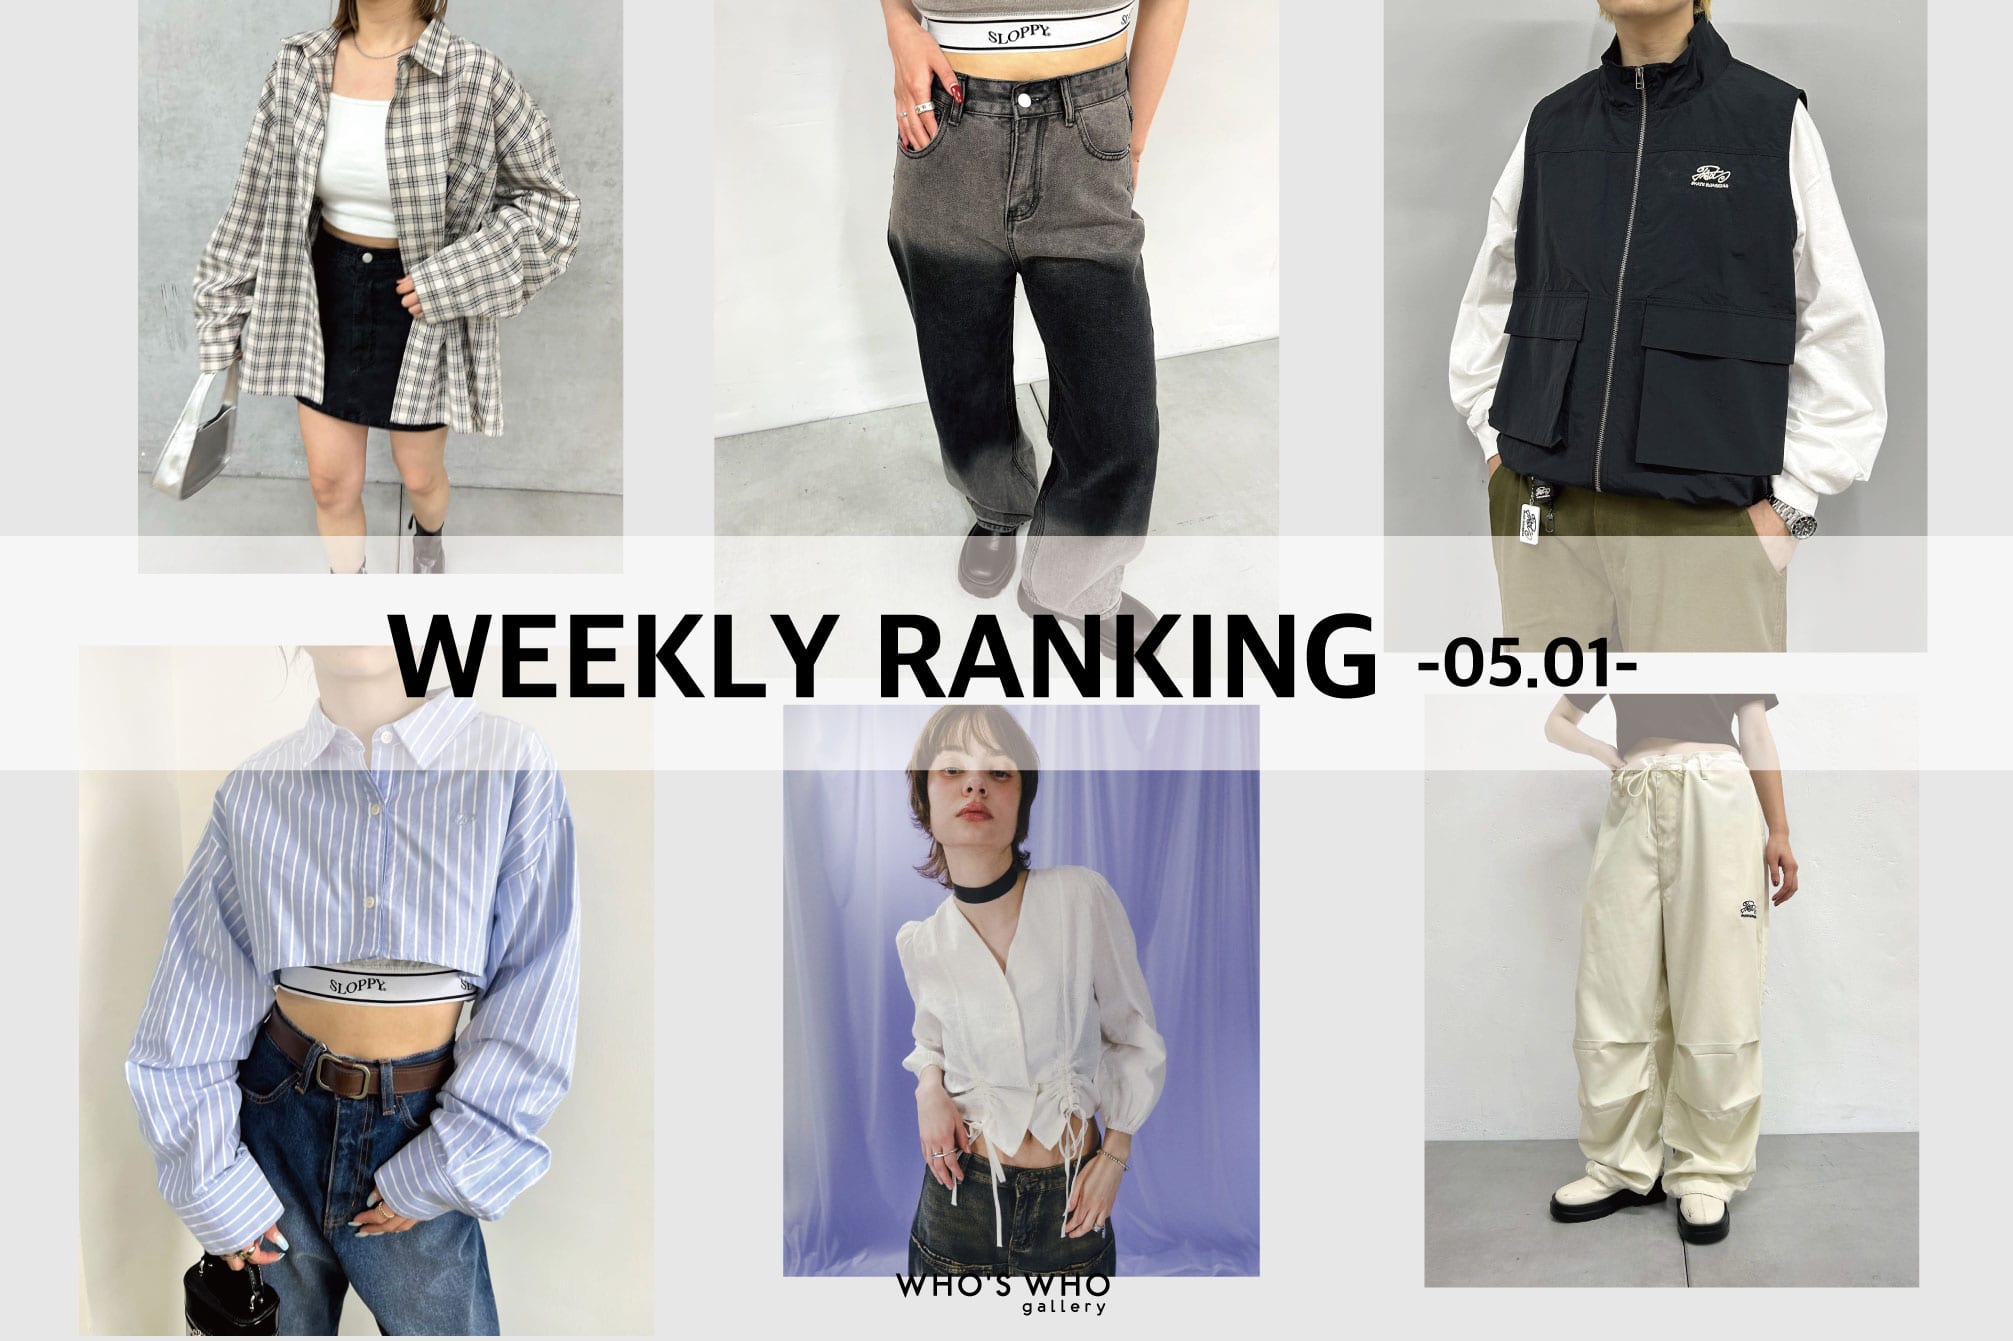 WHO’S WHO gallery 【WEEKLY RANKING -05.01-】